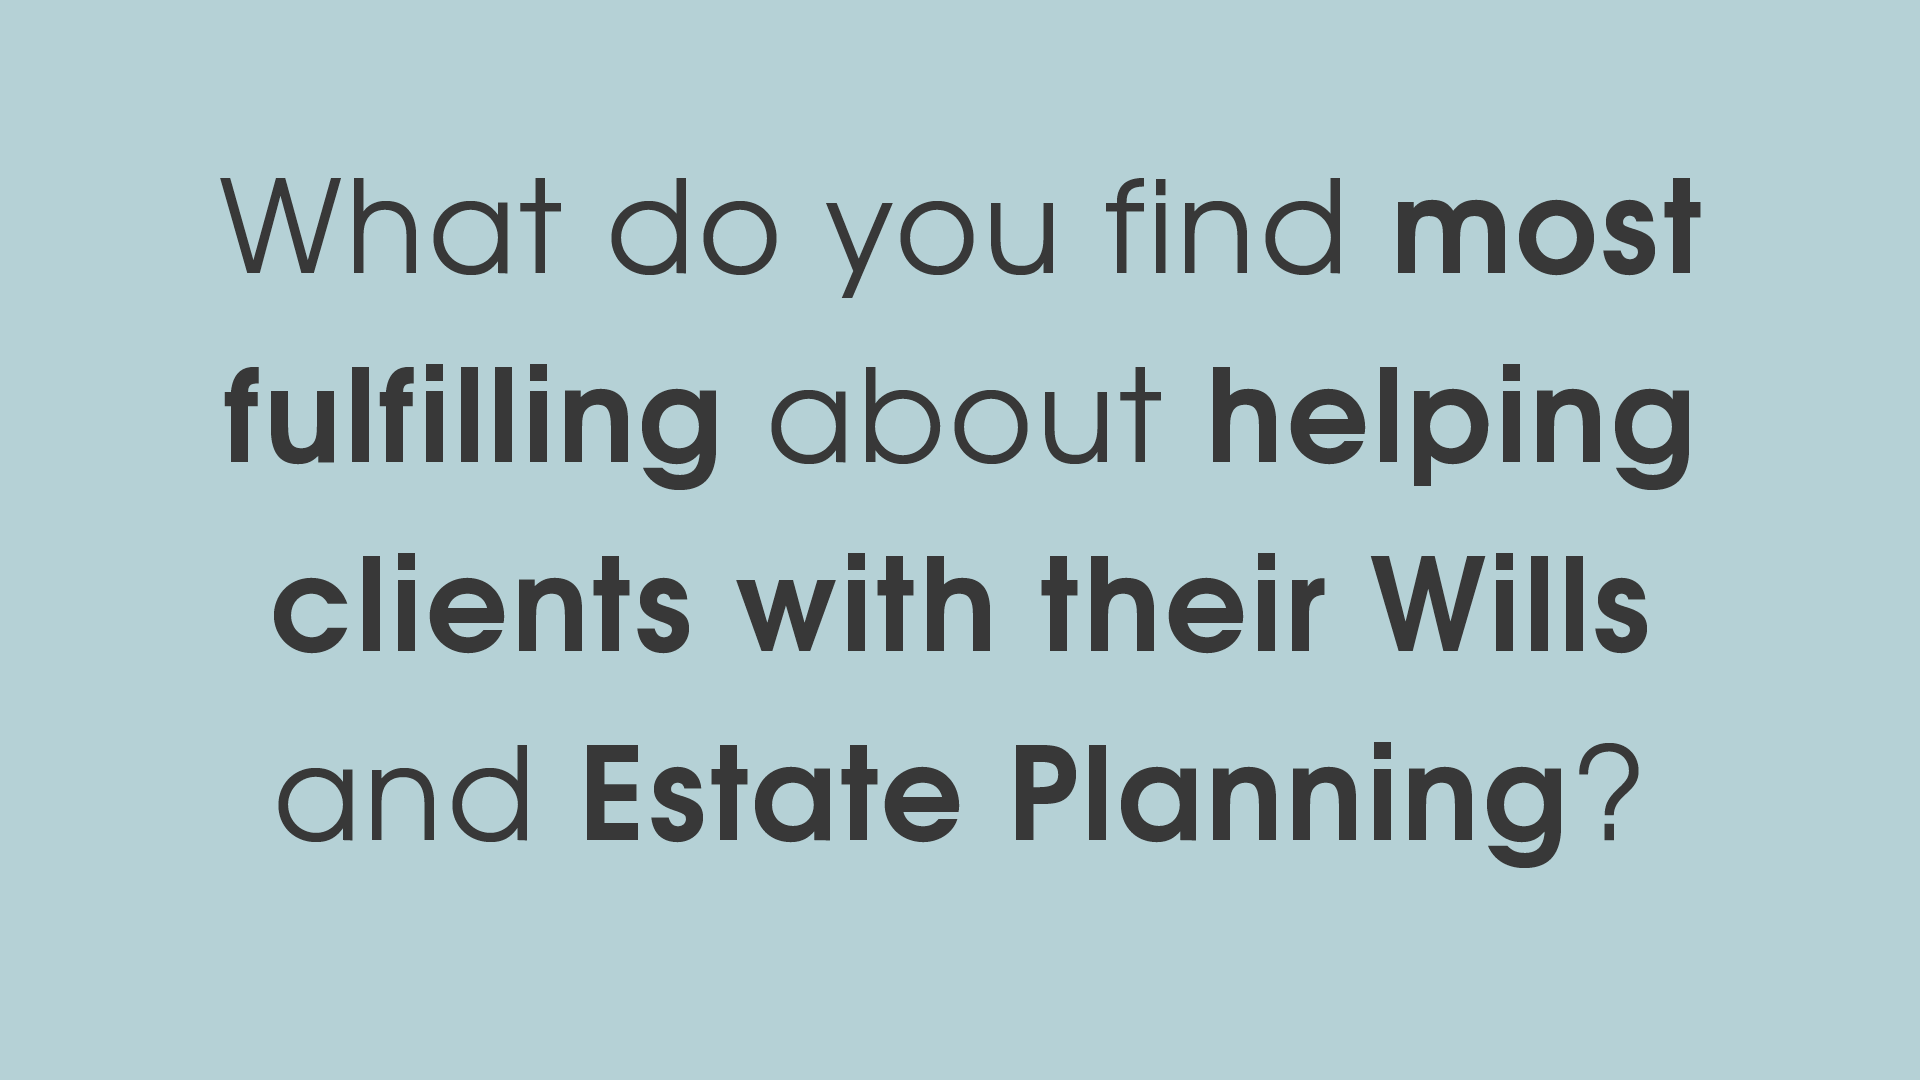 What do you find most fulfilling about helping clients with their wills and estate planning